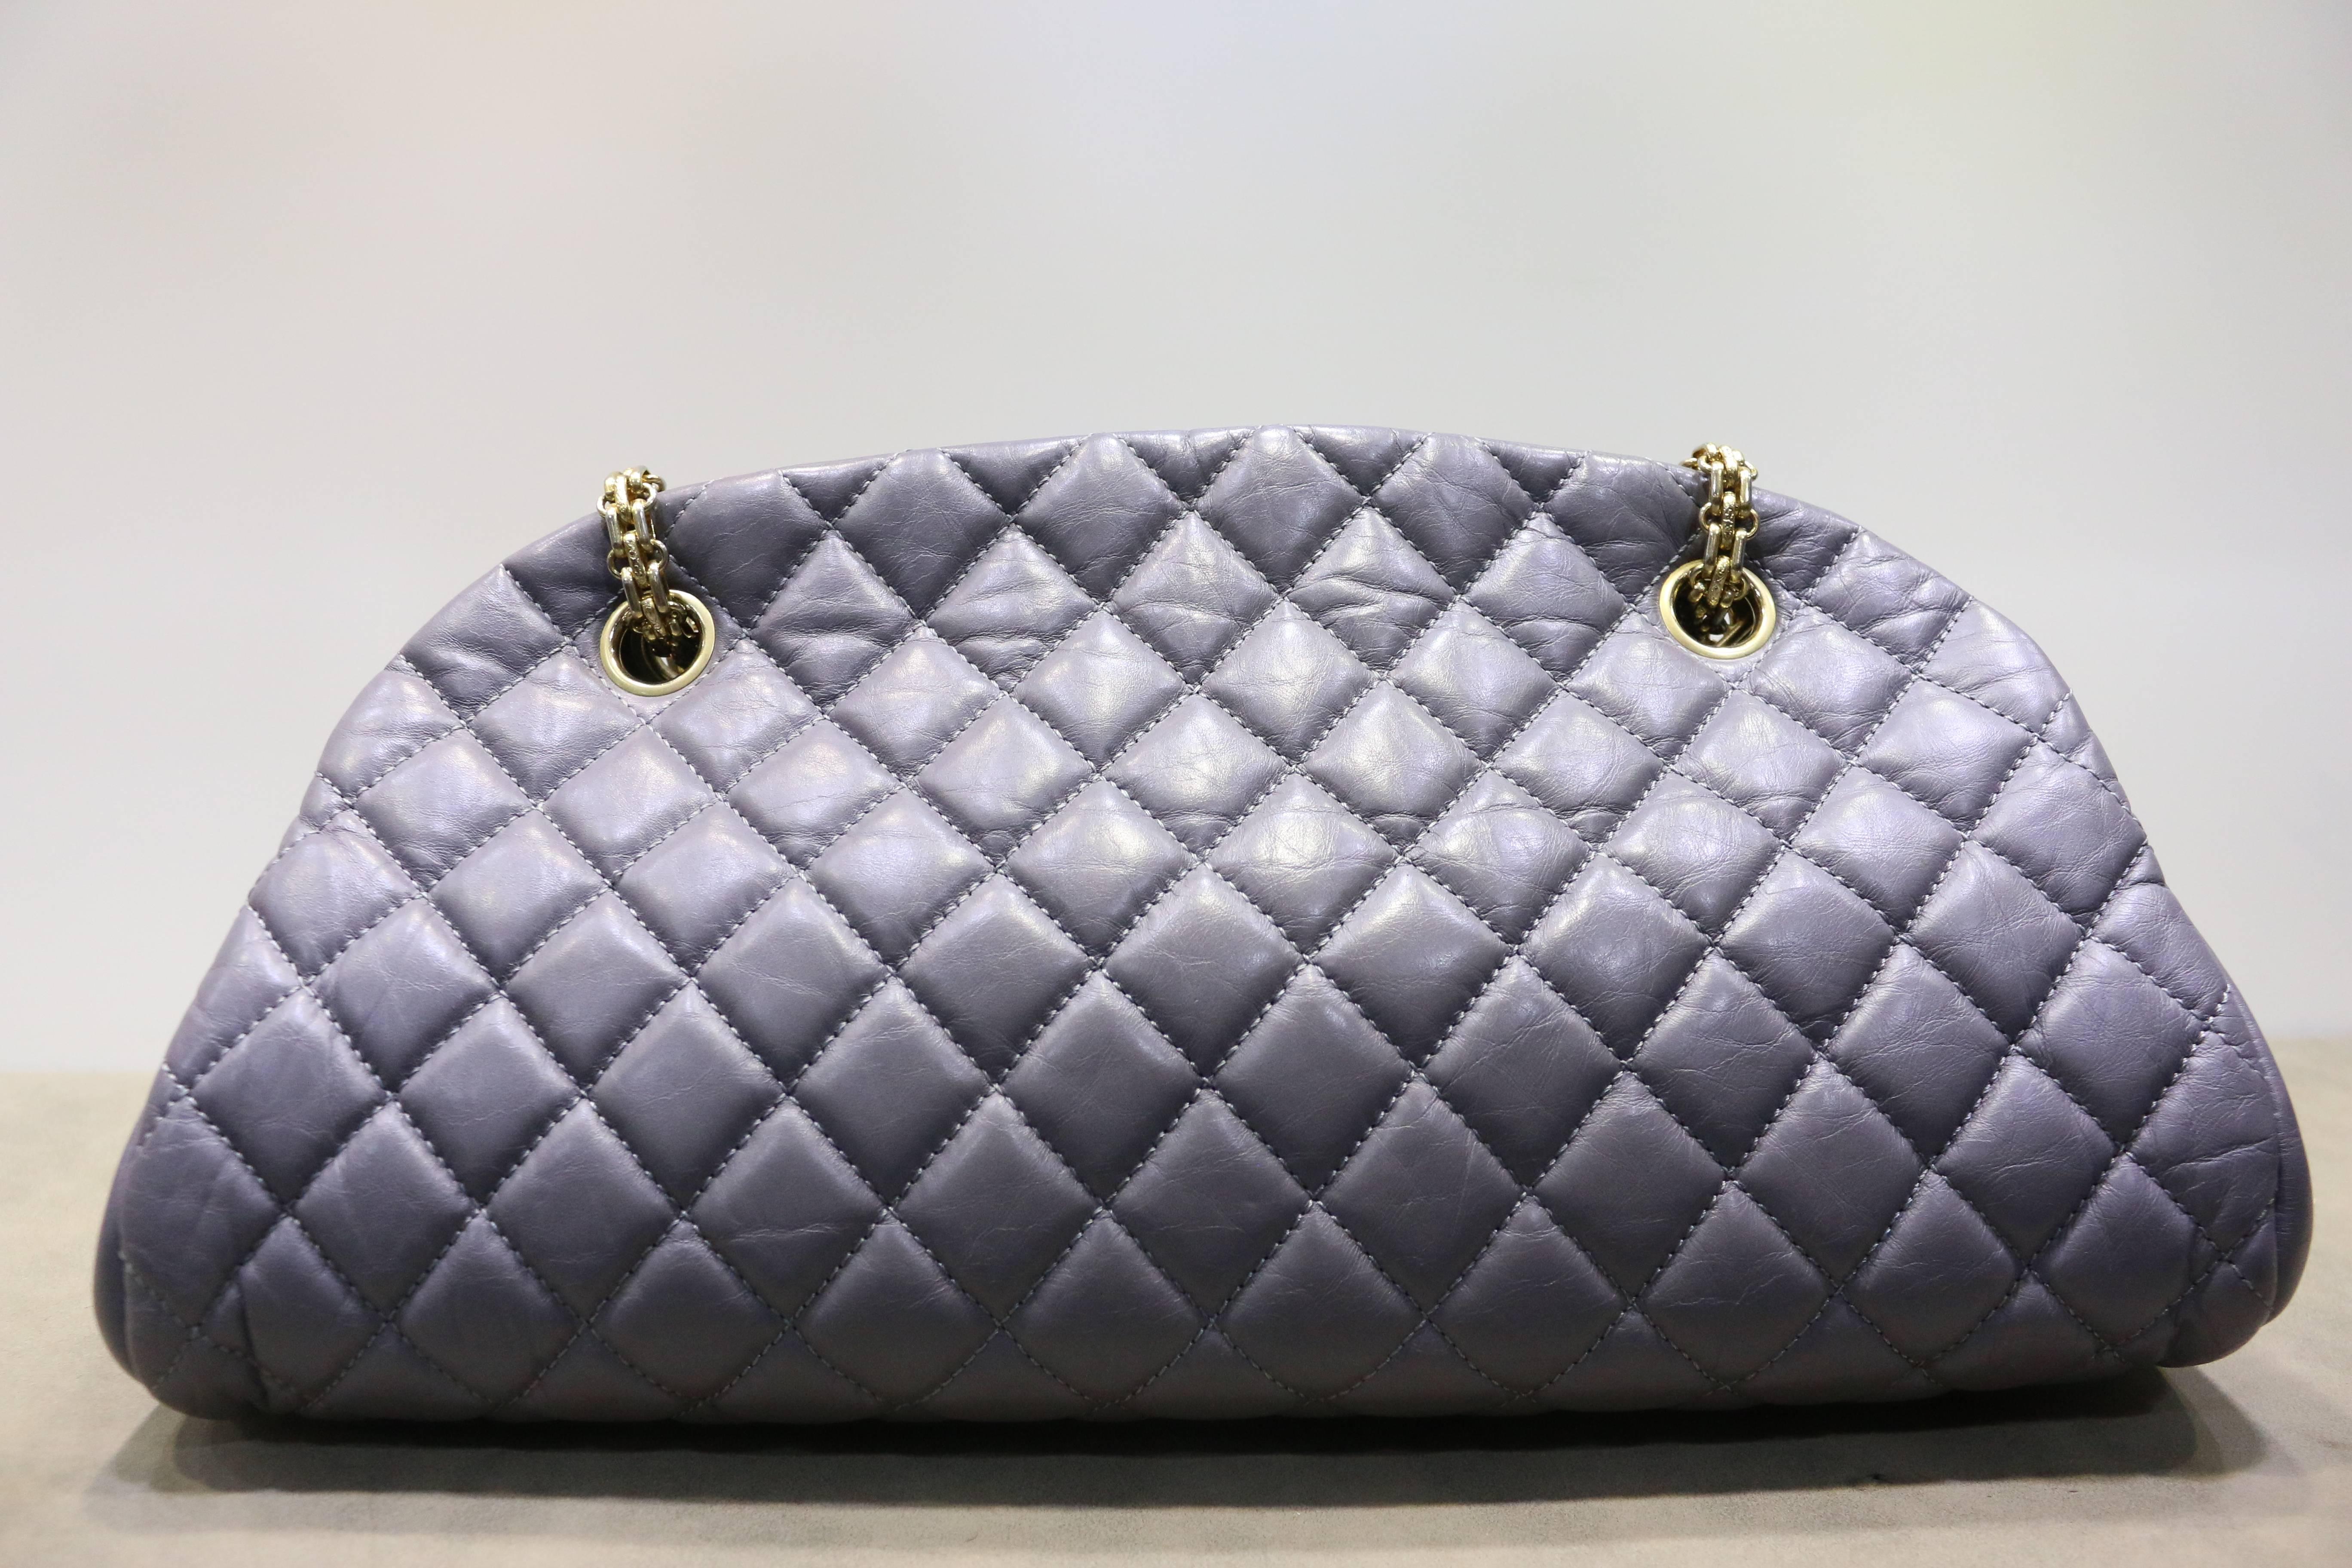 - This Chanel grey quilted lambskin leather bowling bag with gold chain strap is chic and stylist and in excellent preowned condition. It can be a highlight of your outfit with the shiny gold chain strap with "CC" charm attached to it.